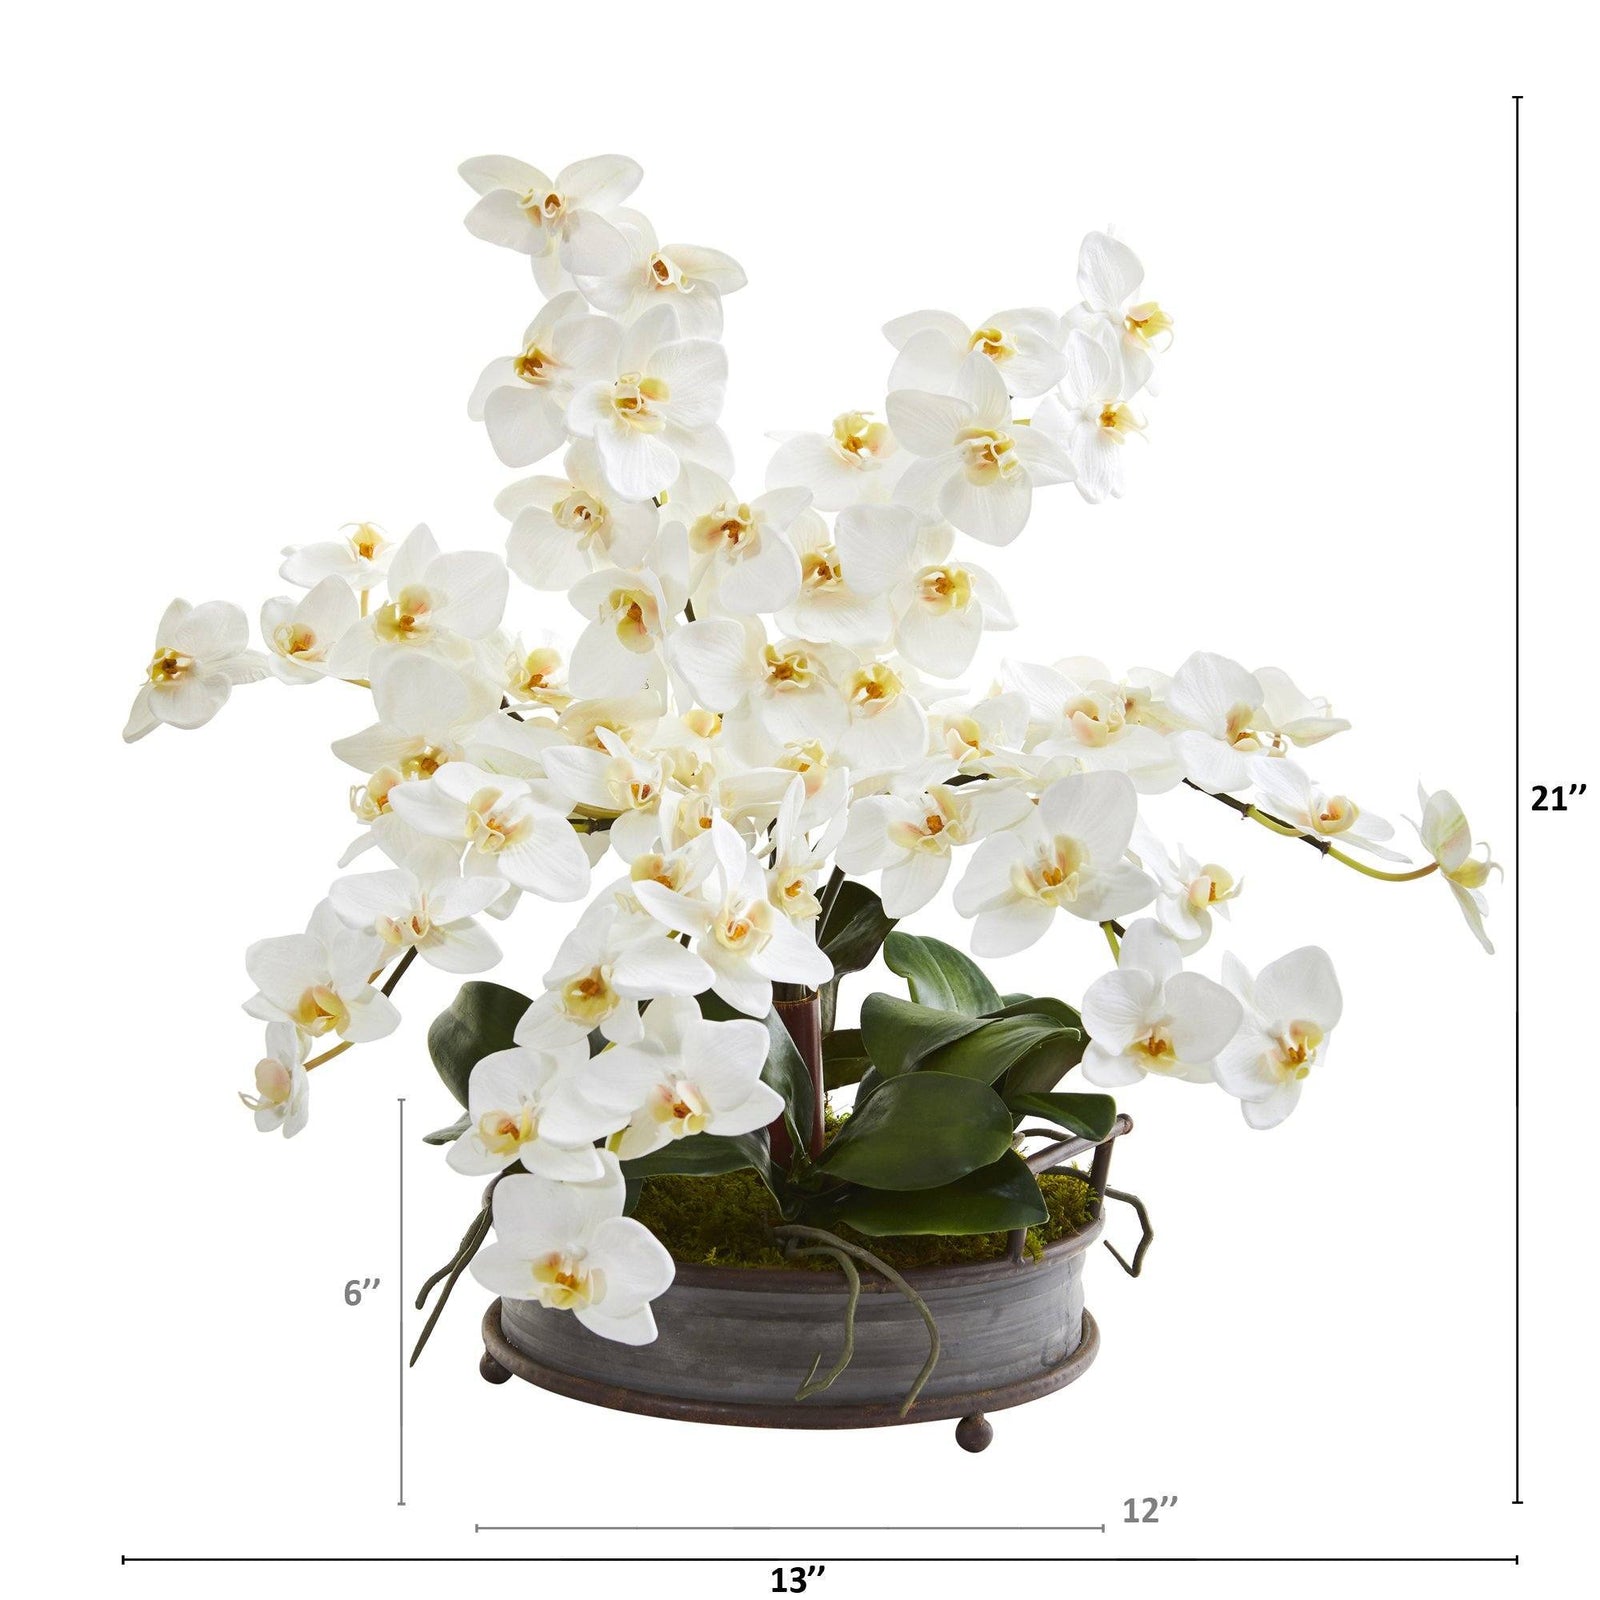 21” Phalaenopsis Orchid Artificial Arrangement in Metal Tray with ...